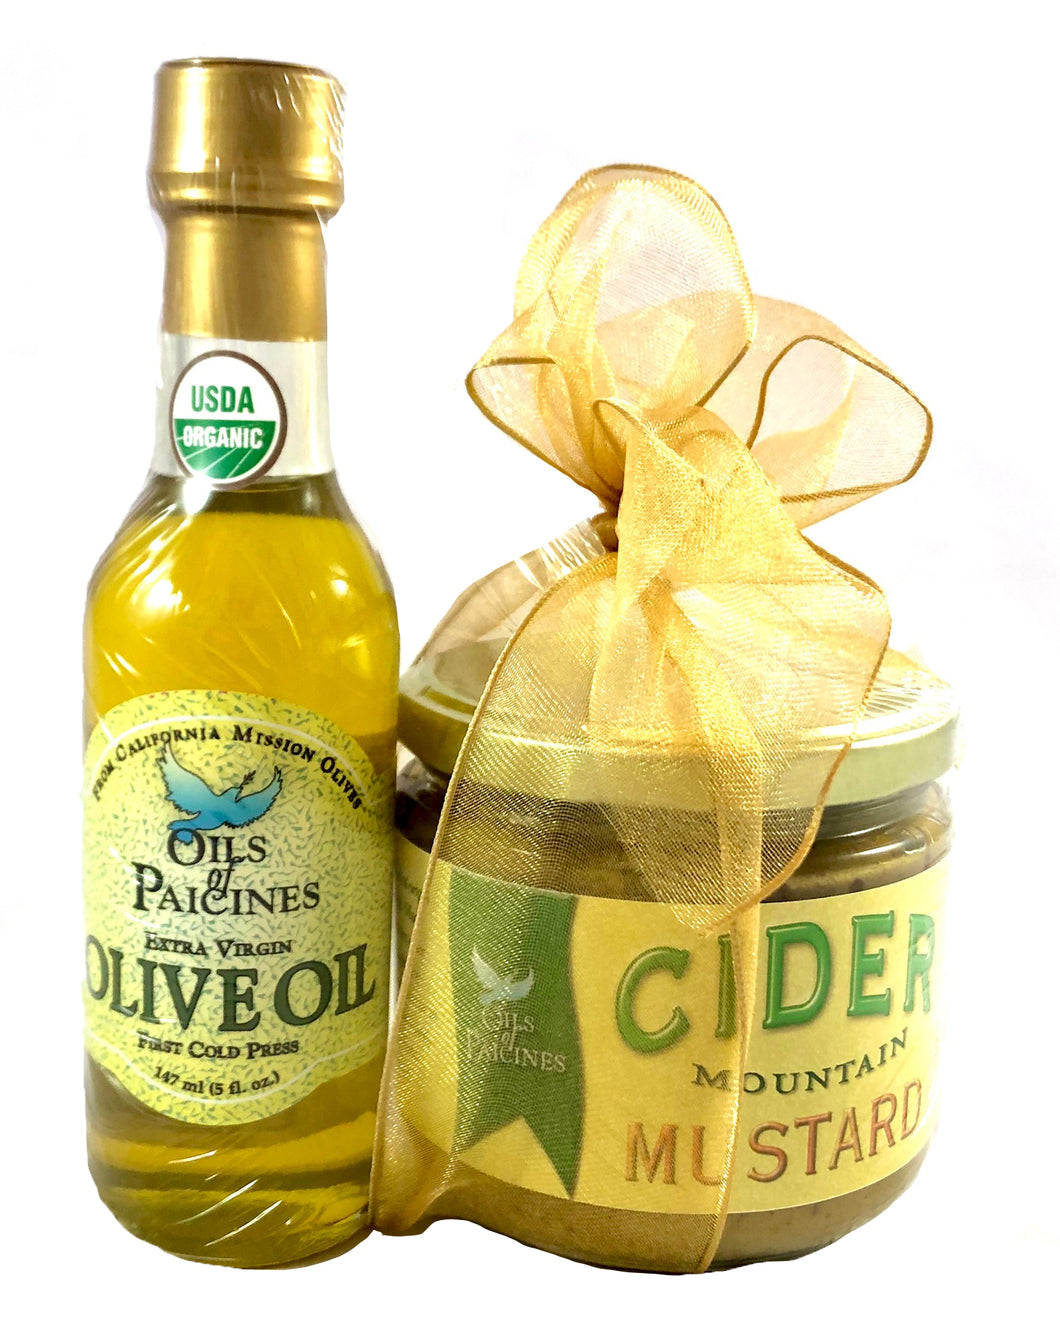 Gourmet Mustard/Organic Olive Oil Gift Set - Choice of 3 Mustard Flavors